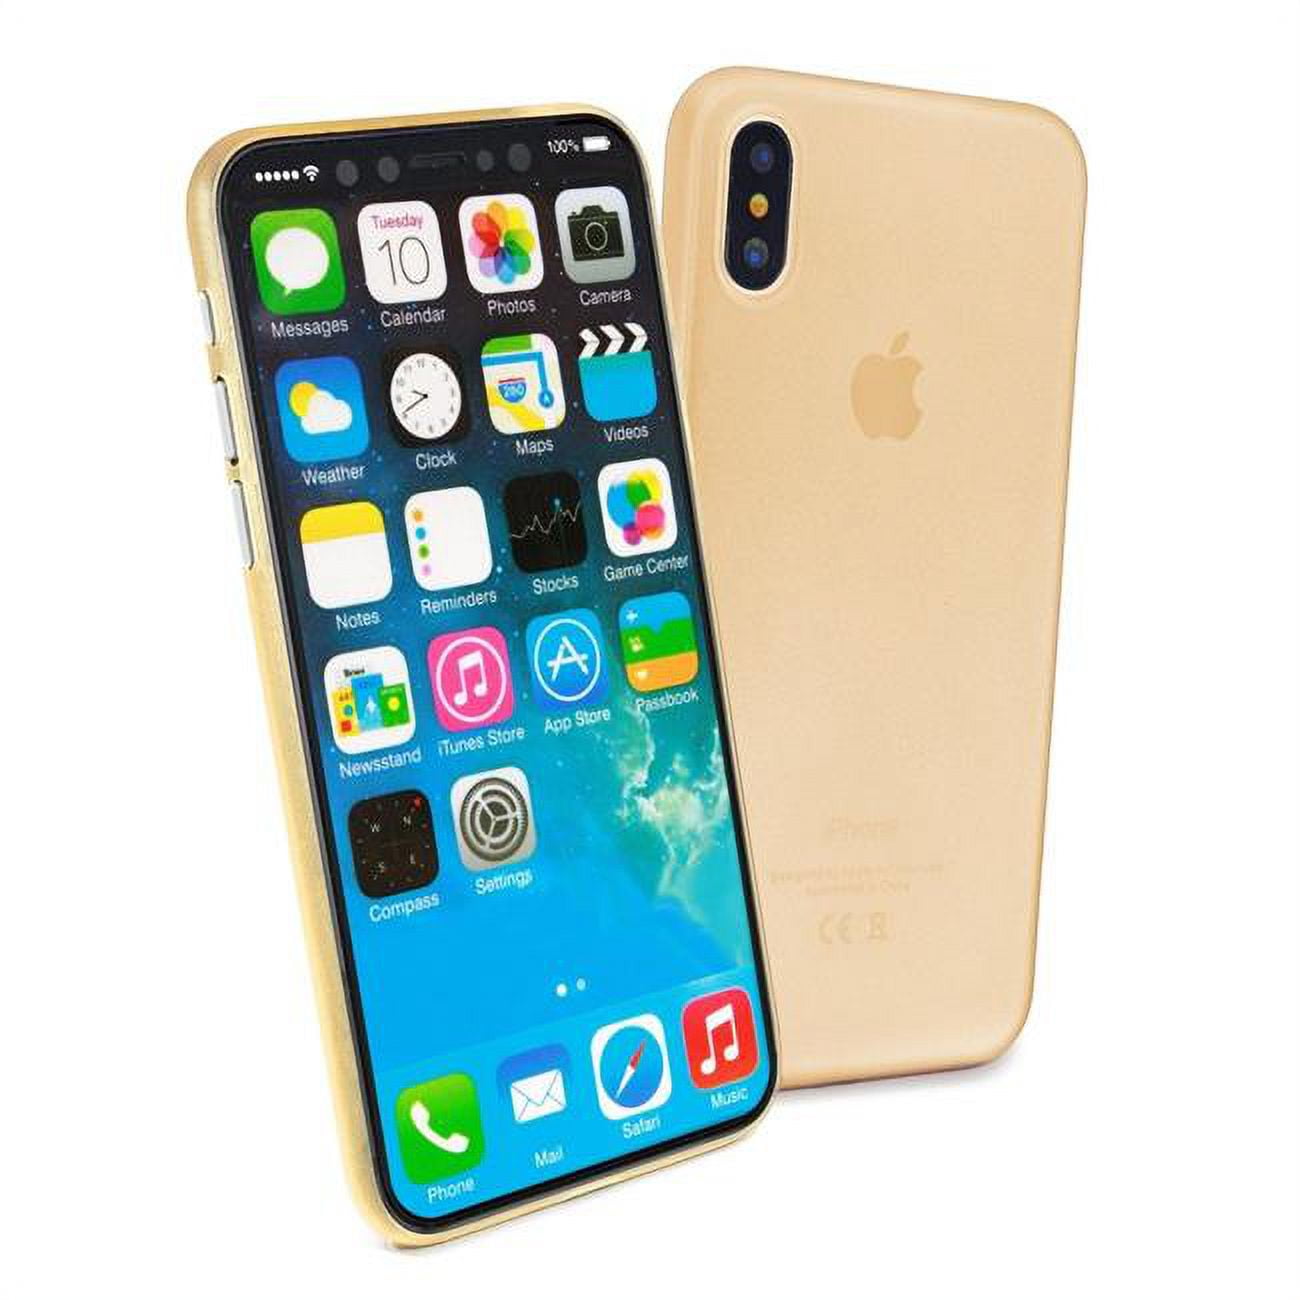 Picture of Tuff-luv B10-96 Rigid Ultrathin & Light weight Skin Case Cover for Apple iPhone X, Gold